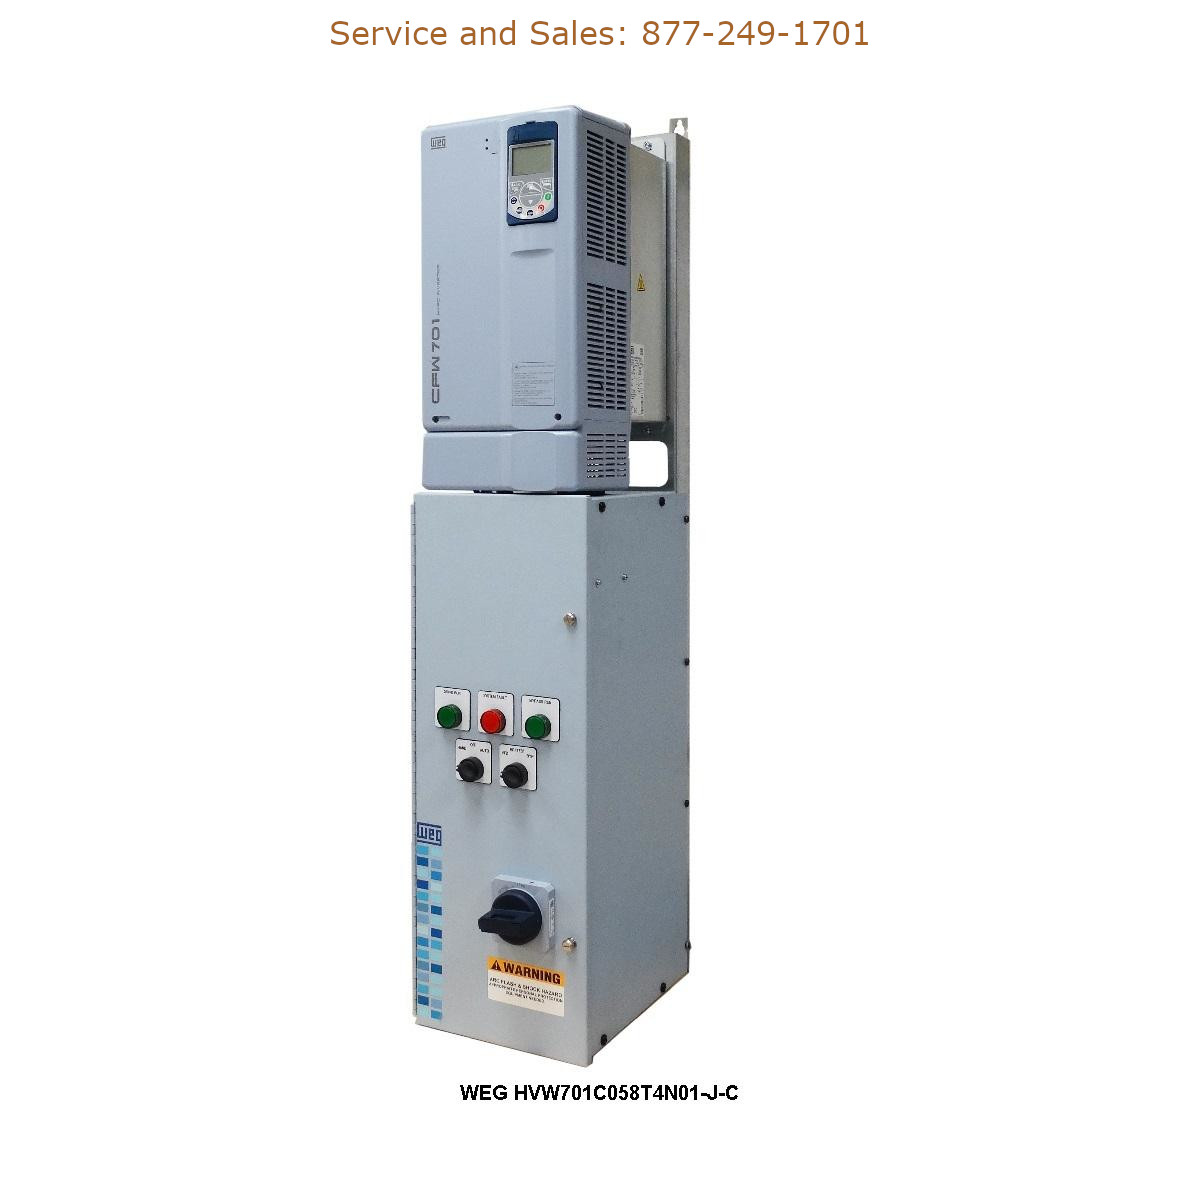 WEG HVW701C058T4N01-J-C WEG Model Number HVW701C058T4N01-J-C WEG Drives, Variable Speed Drives Repair Service, Troubleshooting, Replacement Parts https://gesrepair.com/wp-content/uploads/2022/WEG/WEG_HVW701C058T4N01-J-C_Drives_Variable_Speed_Drives.jpg